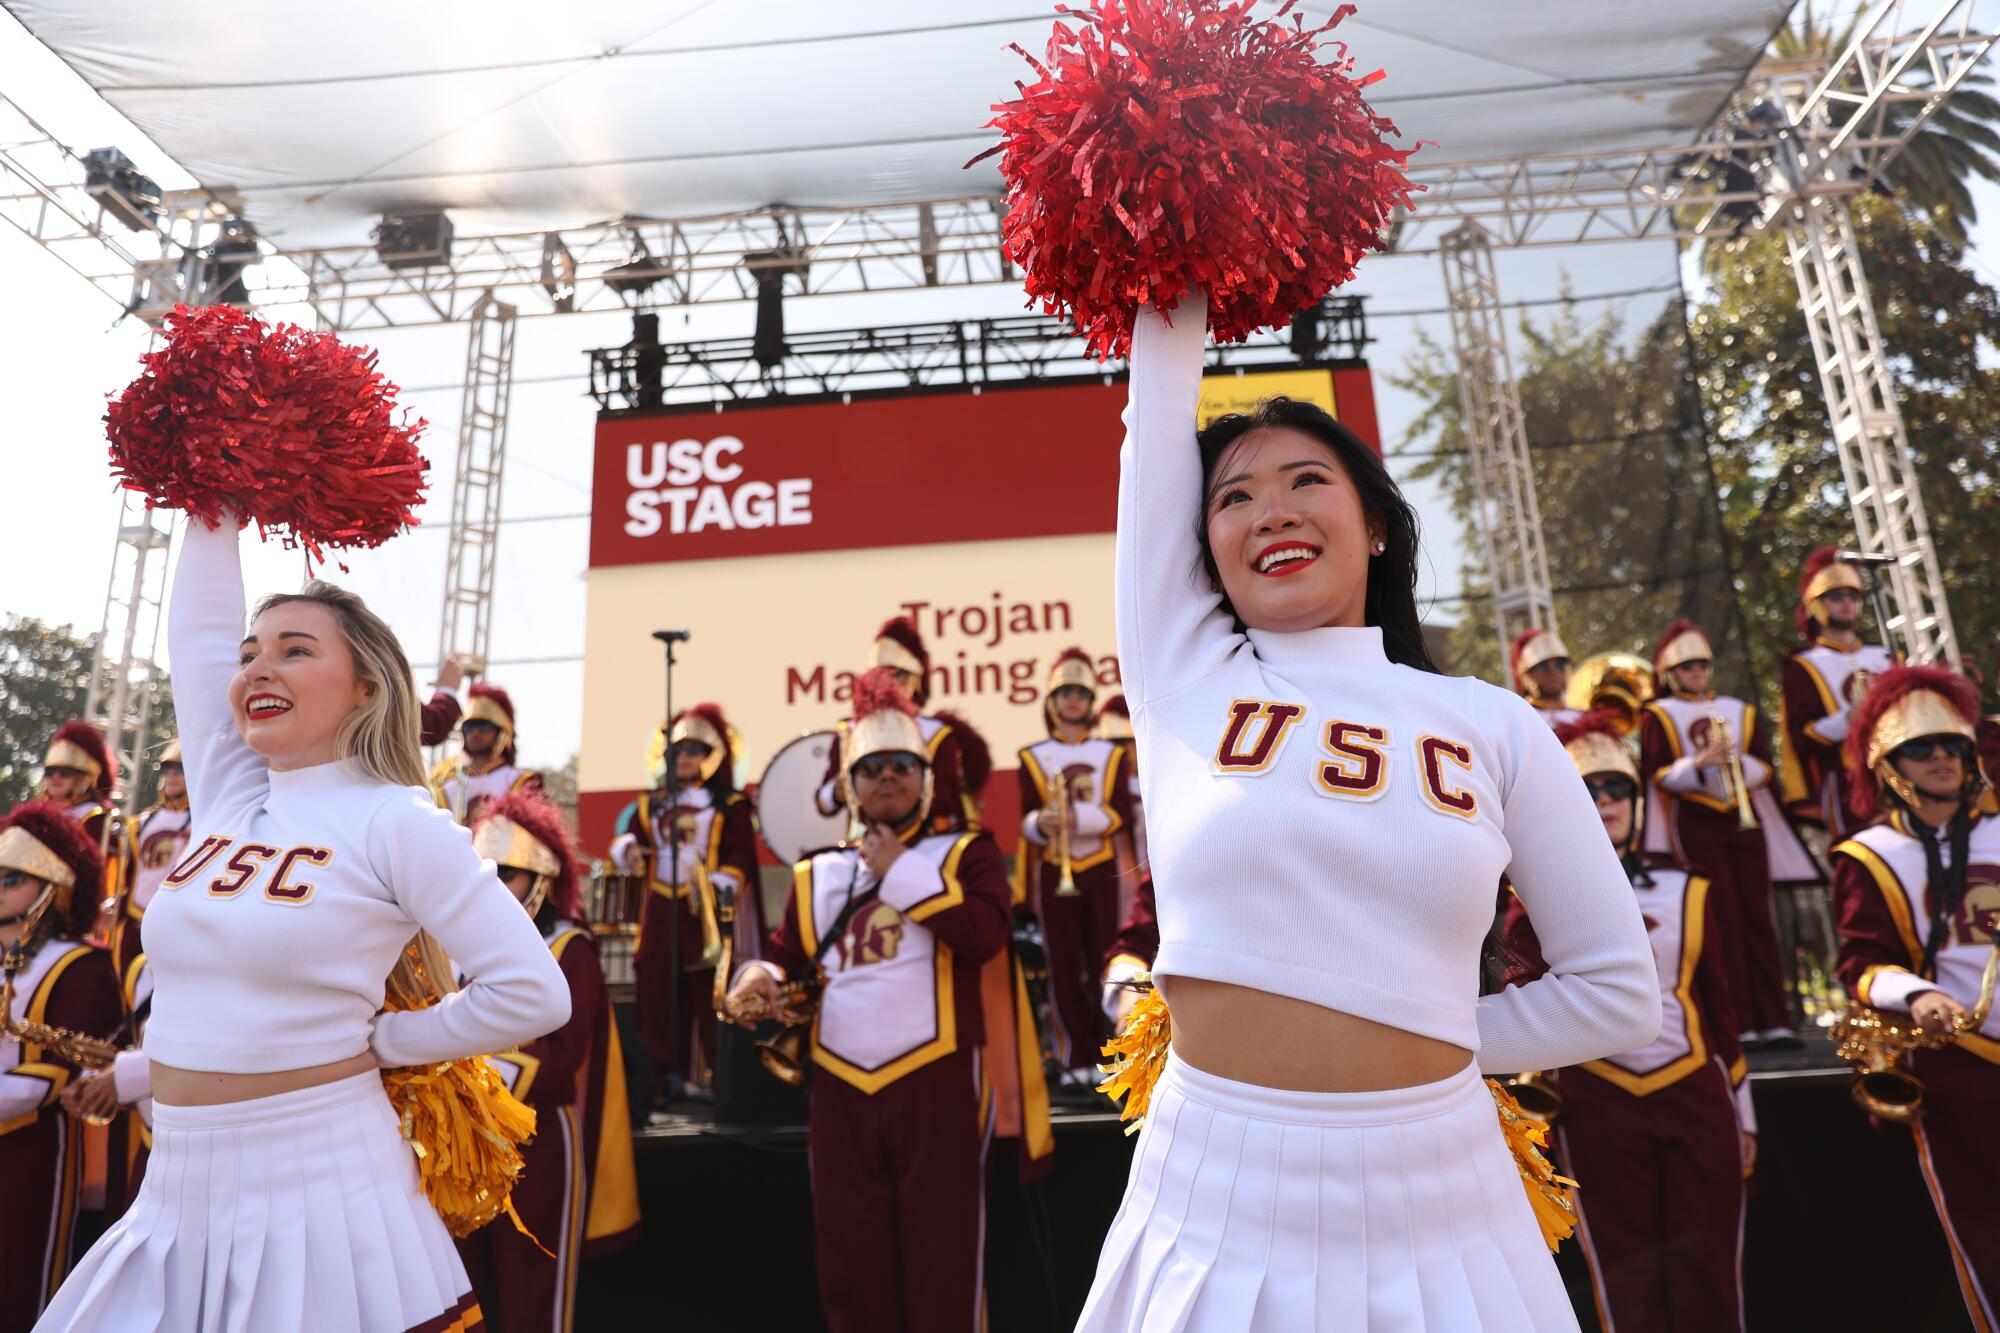 USC cheerleaders and band members perform during the LA Times Book Festival.